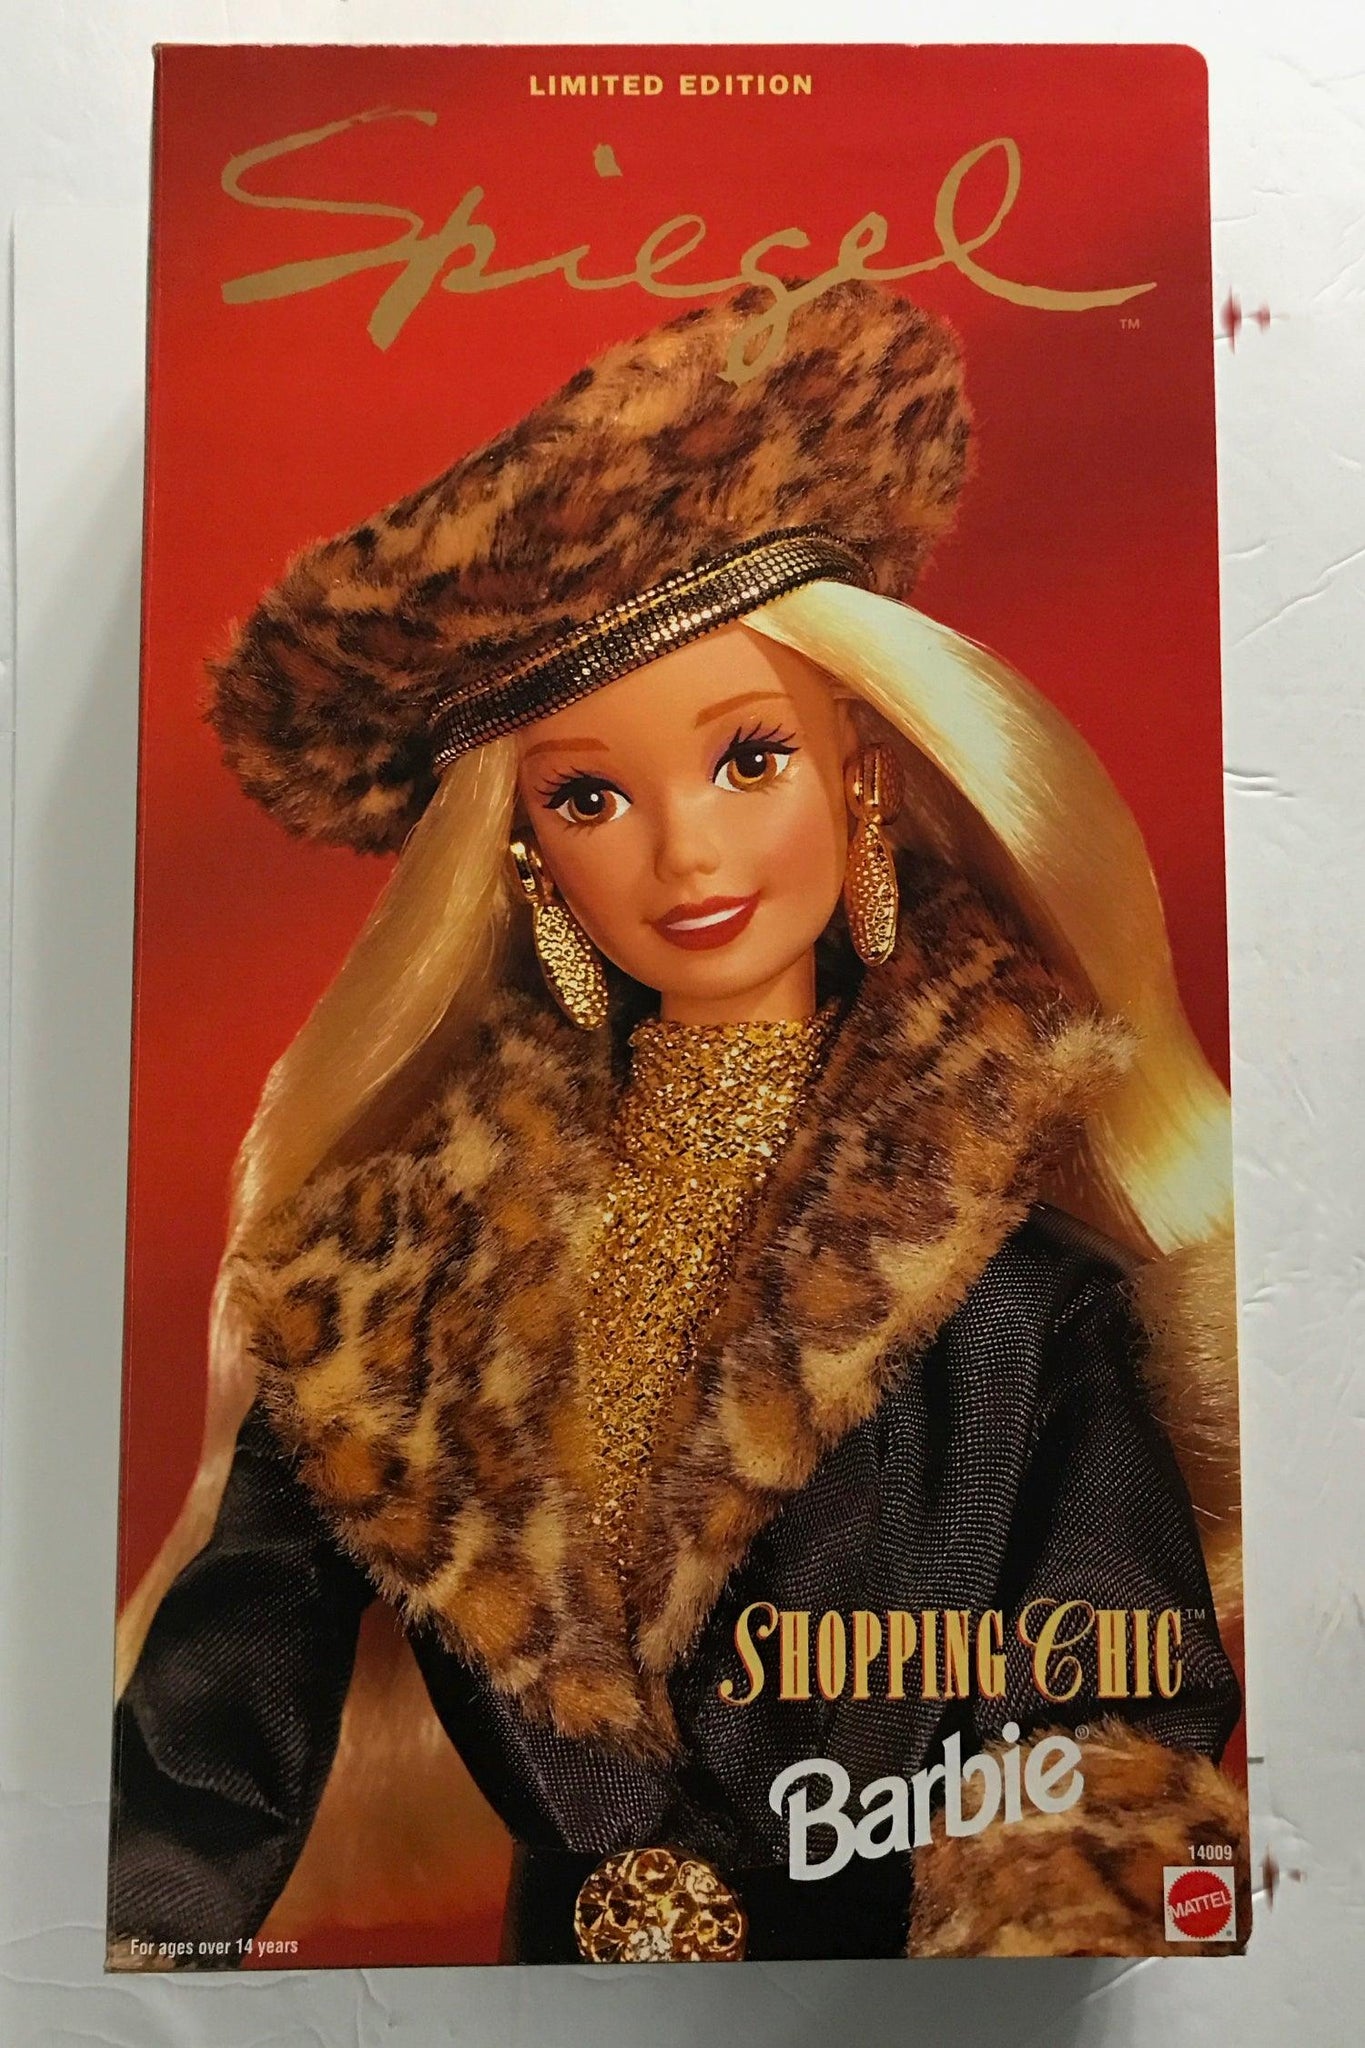 Spiegel Shopping Chic Barbie - Limited Edition (1995) - Lamoree’s Vintage